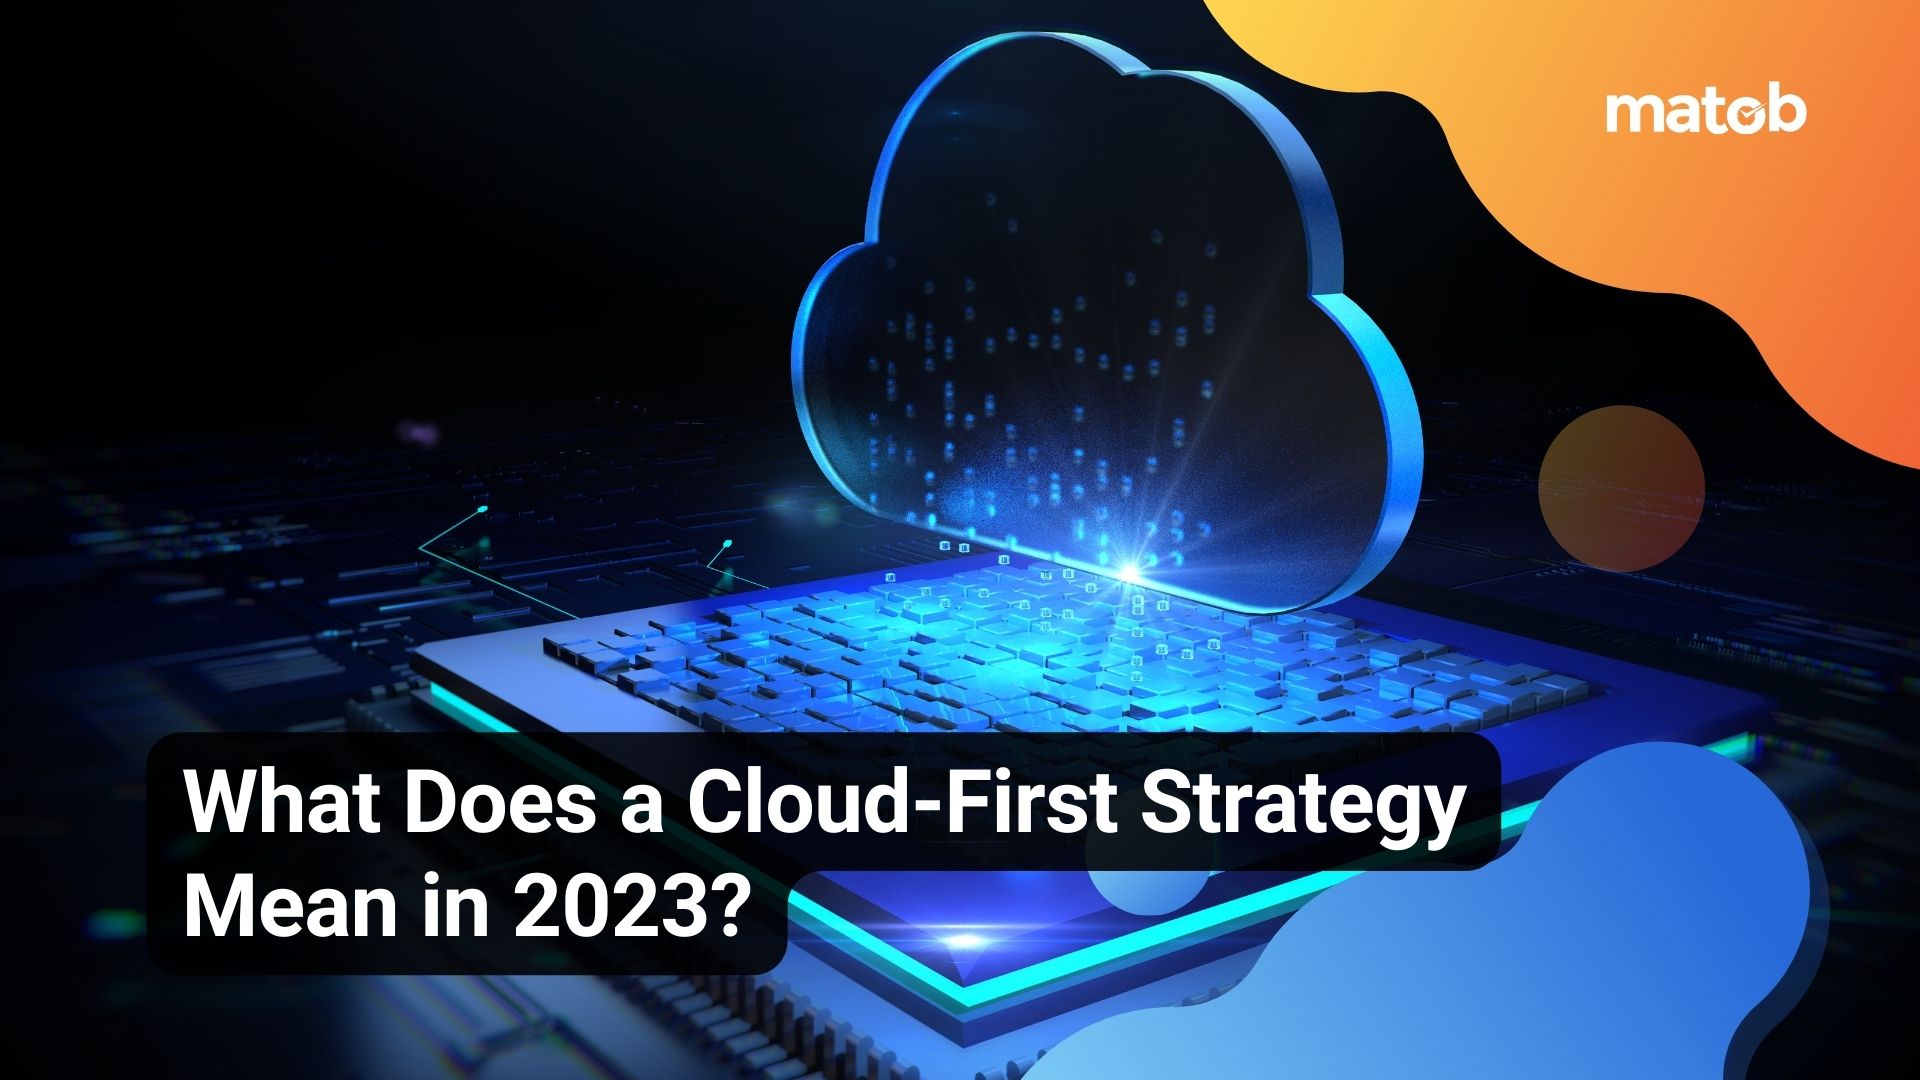 What Does a Cloud-First Strategy Mean in 2023?